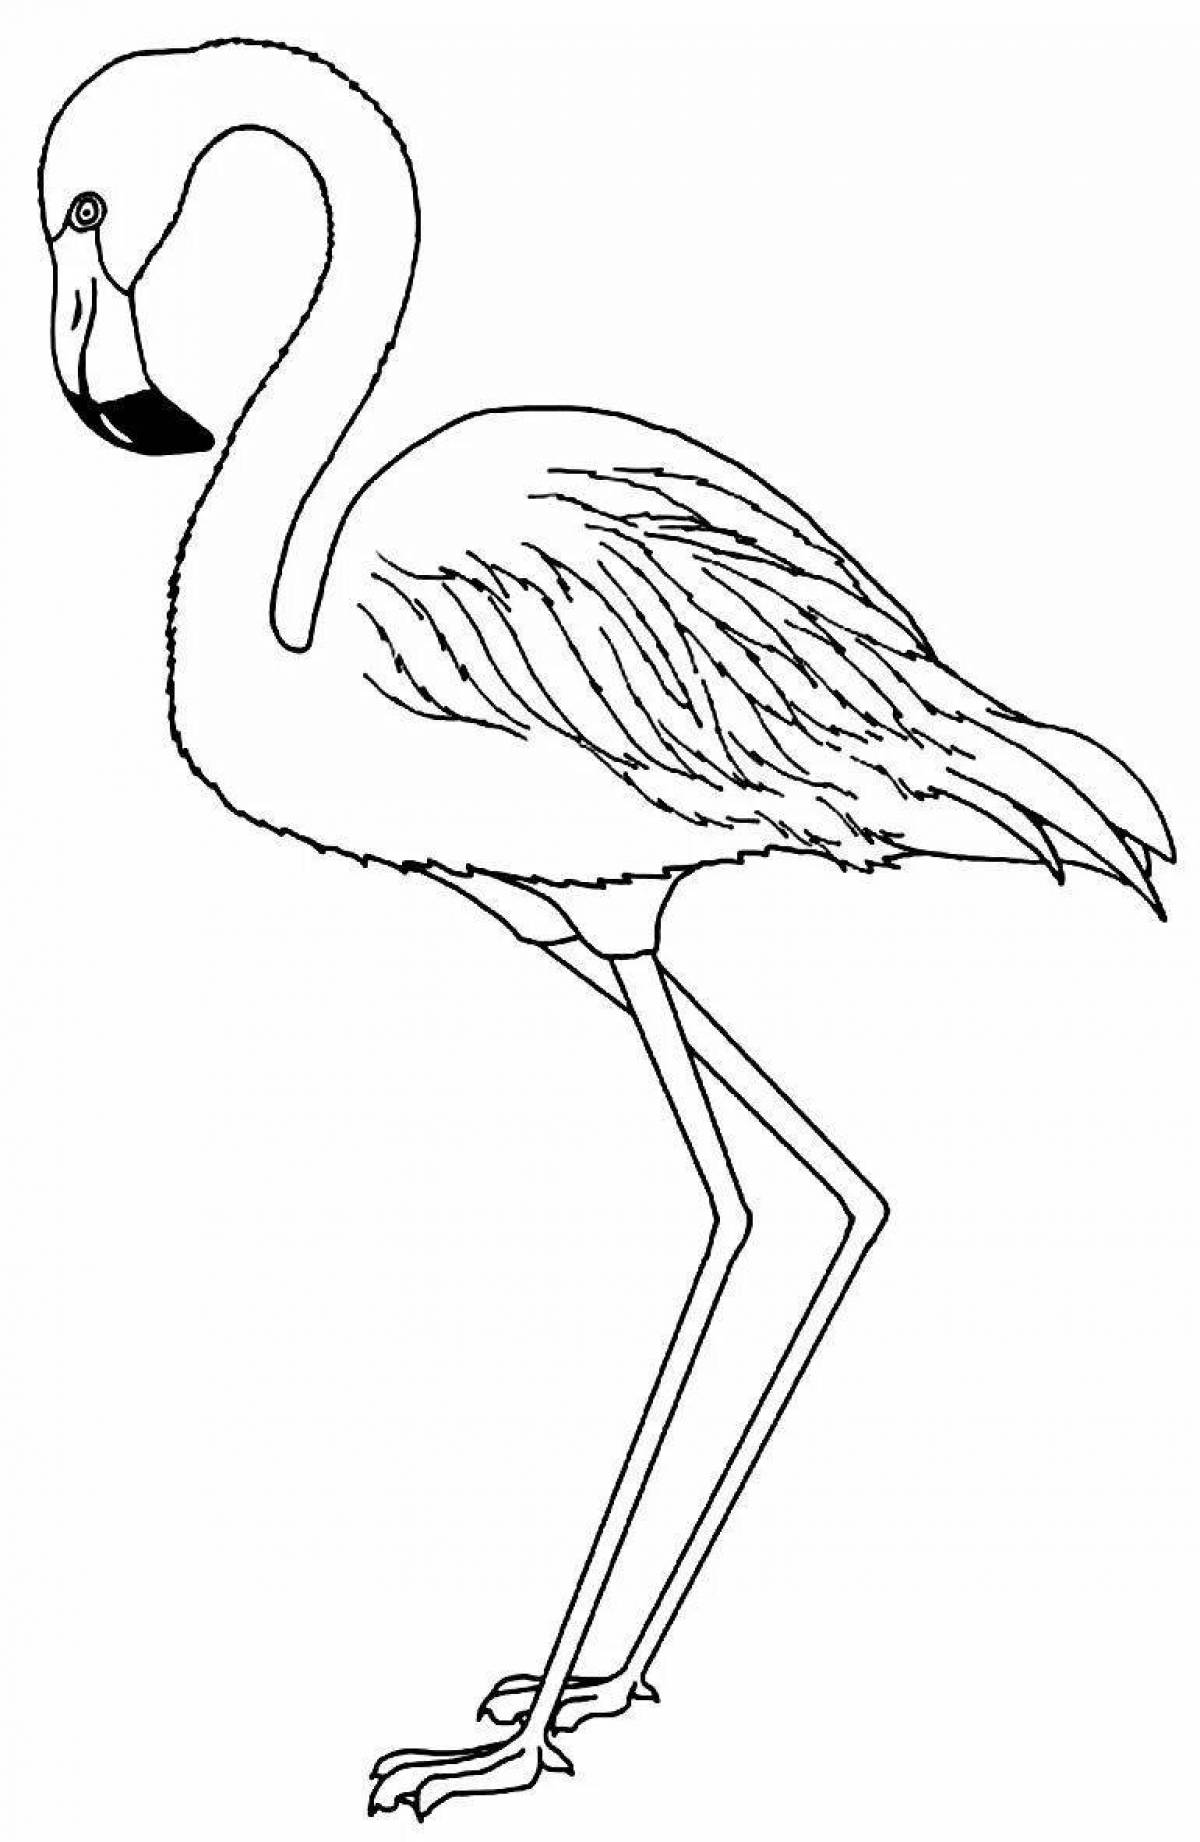 Delightful pink flamingo coloring page